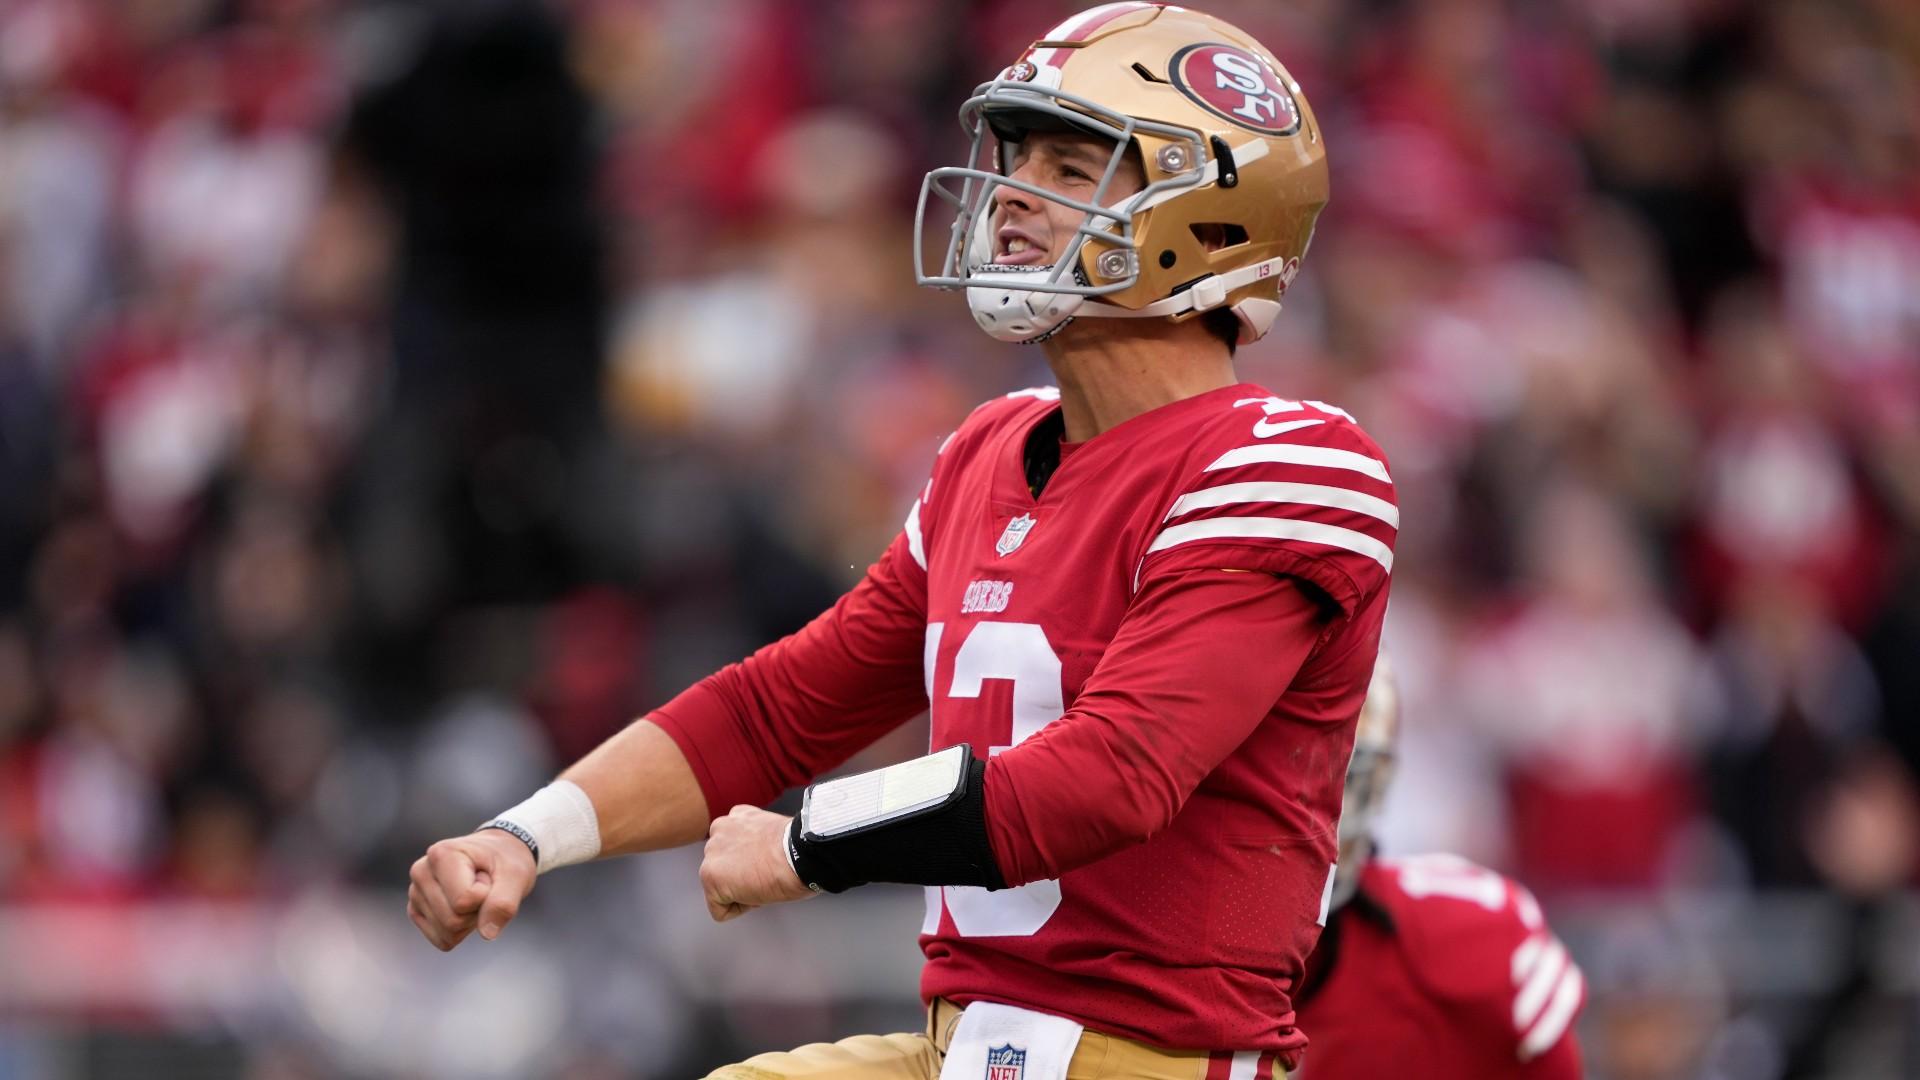 Here are the quarterbacks picked before 49ers' Brock Purdy in the 2022 NFL Draft